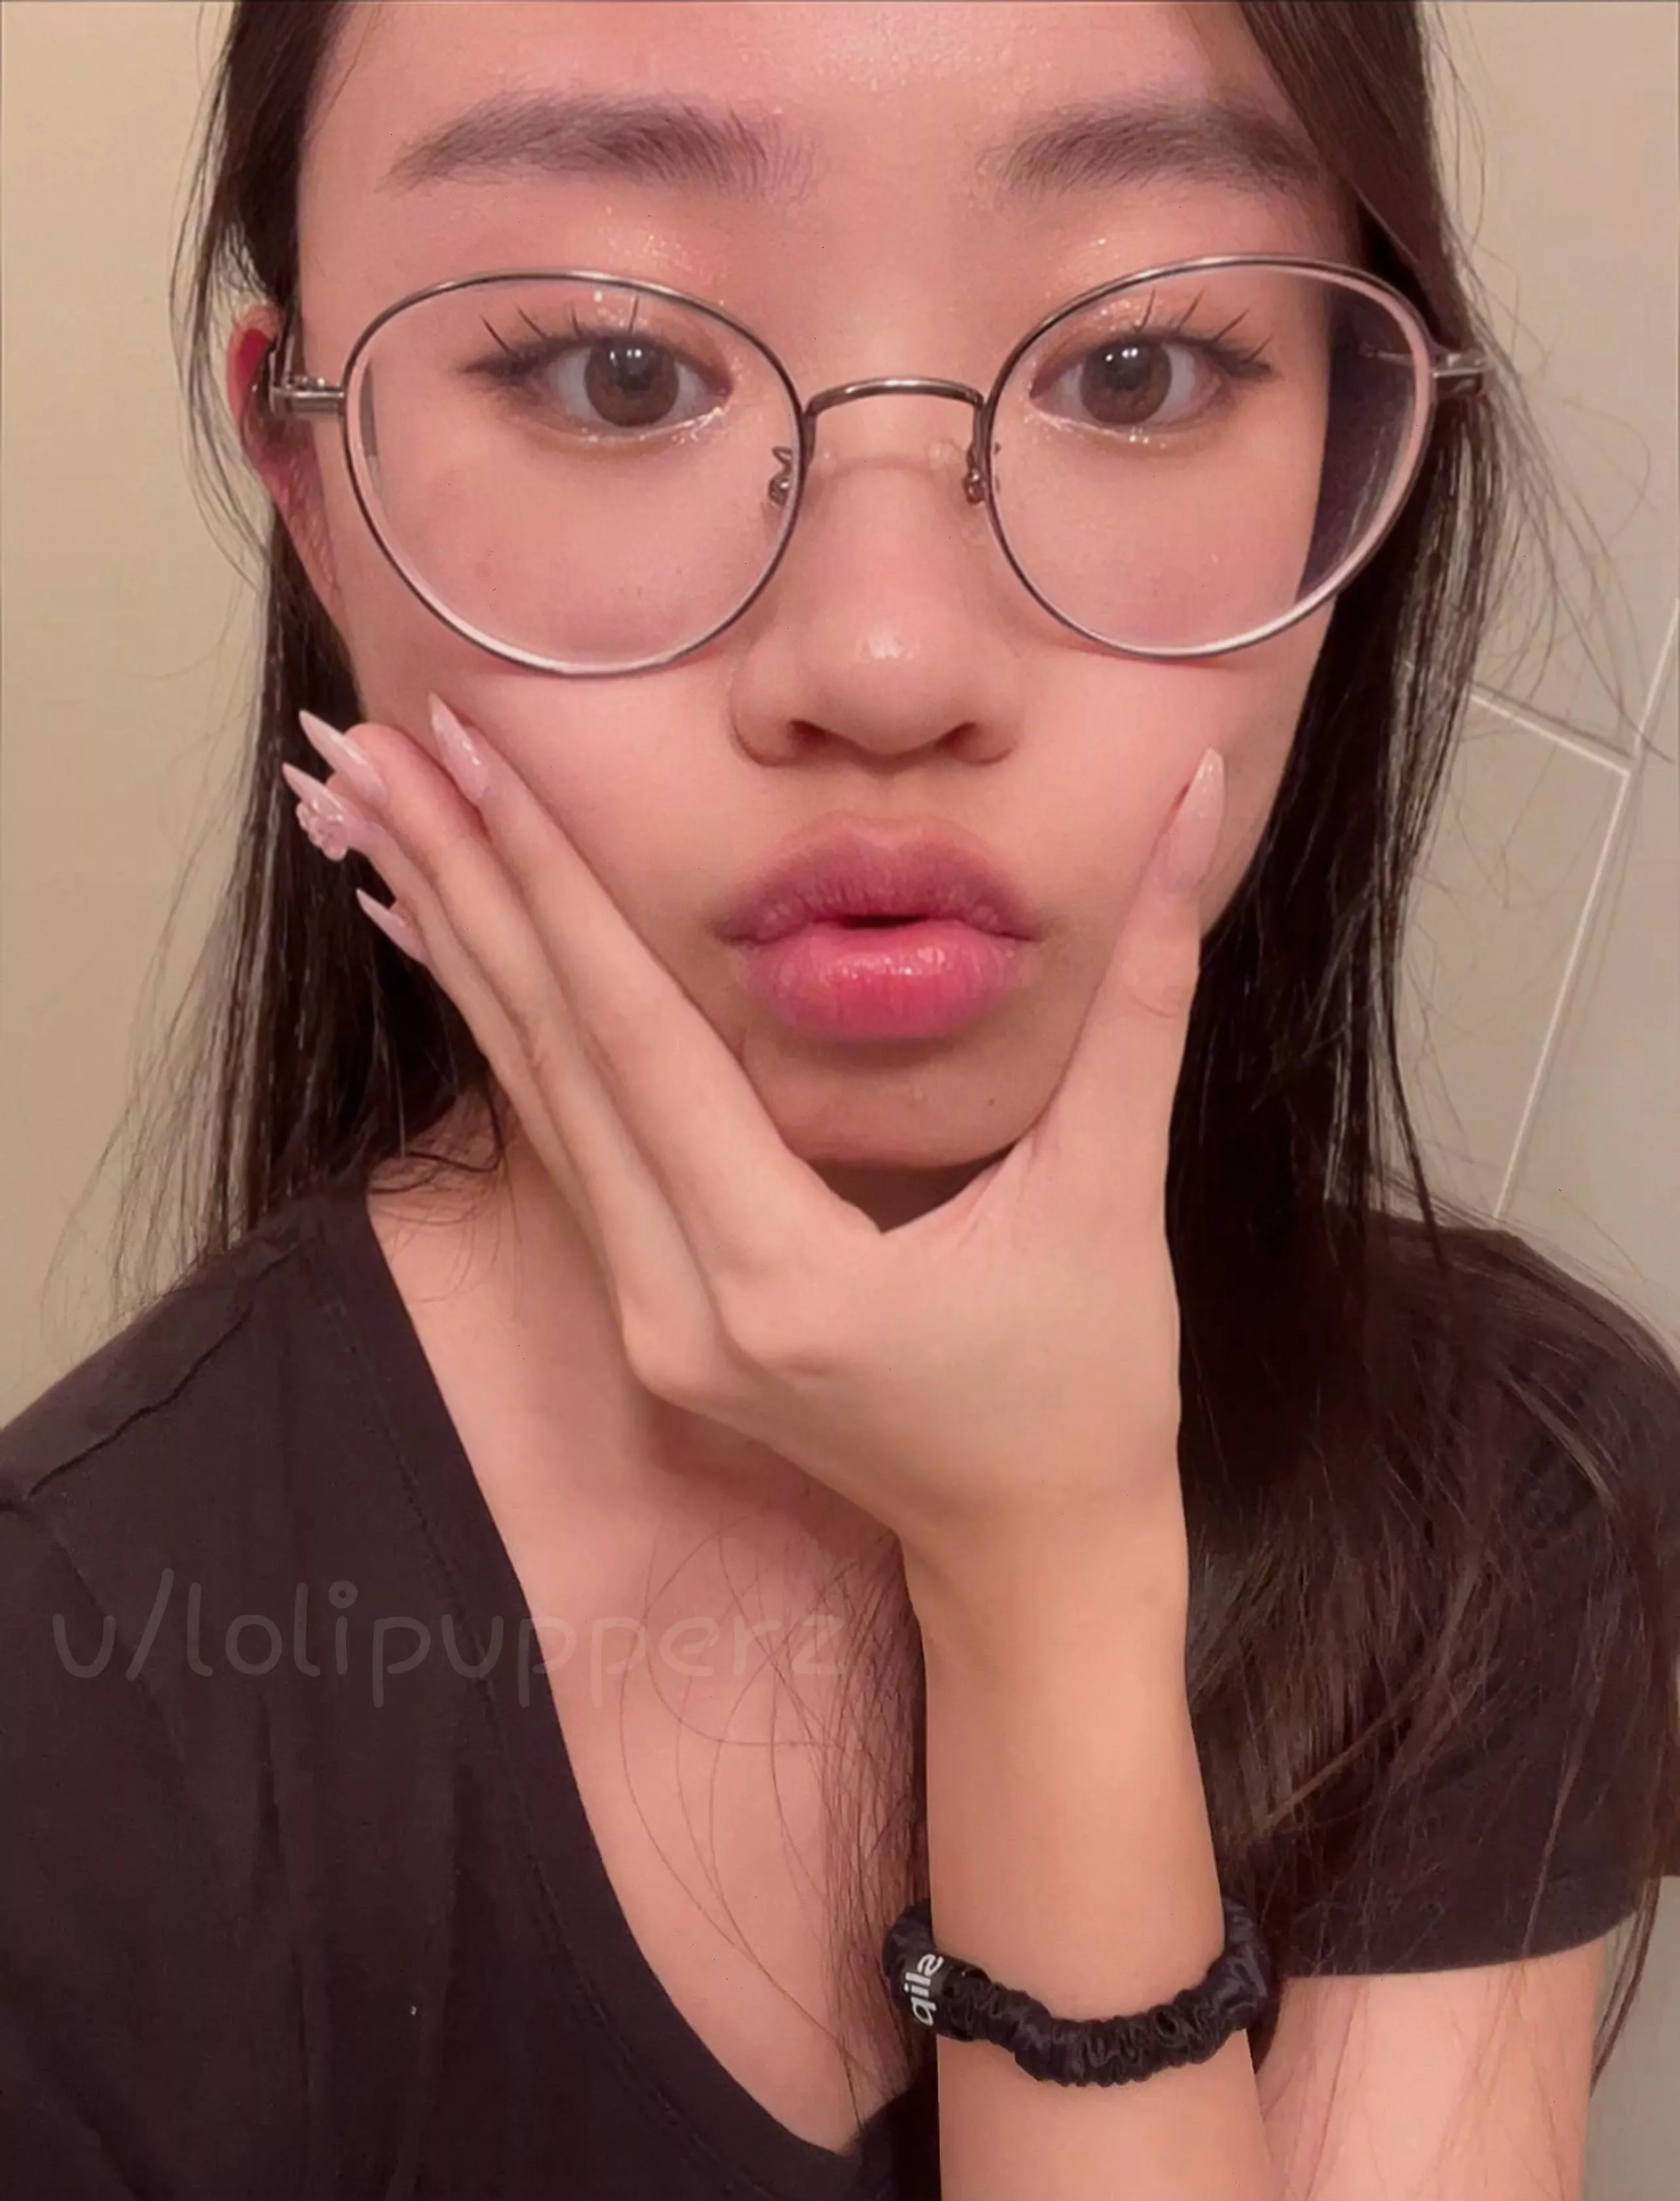 pretty lips for making out and sucking your cock ðŸ¥ºðŸ’— nudes by lolipupperz